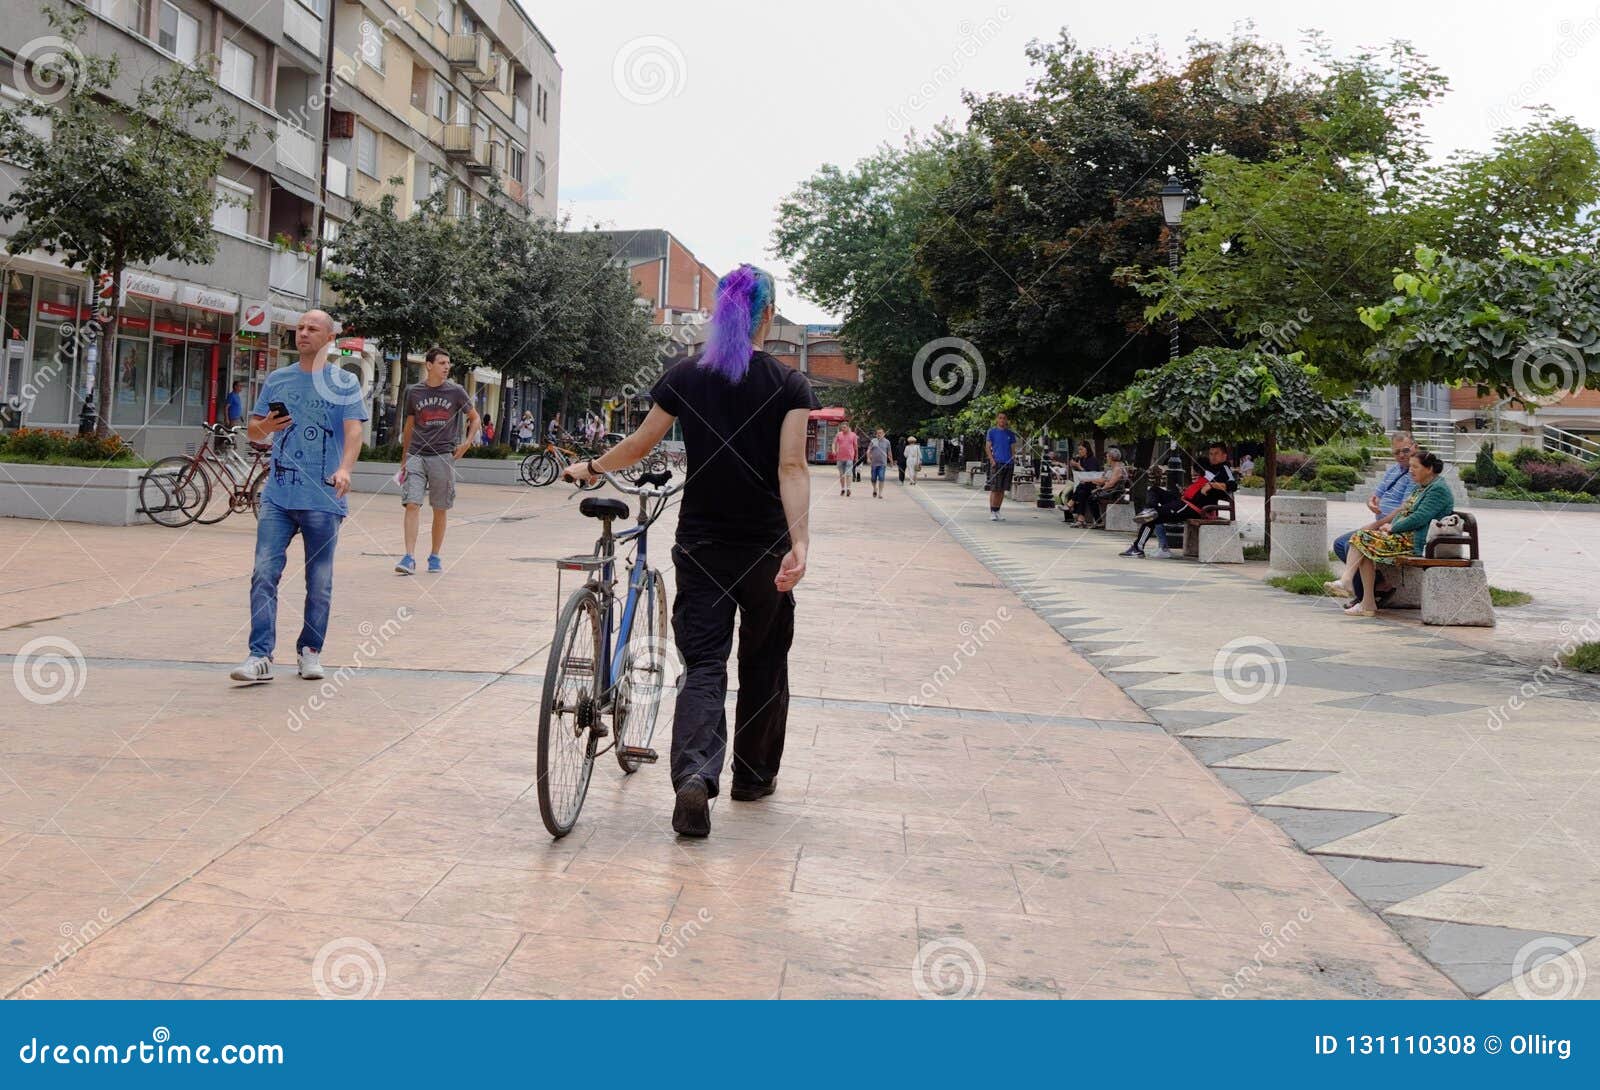 Man with Purple Hair in Pirot, Serbia Editorial Stock Photo - Image of  town, area: 131110308